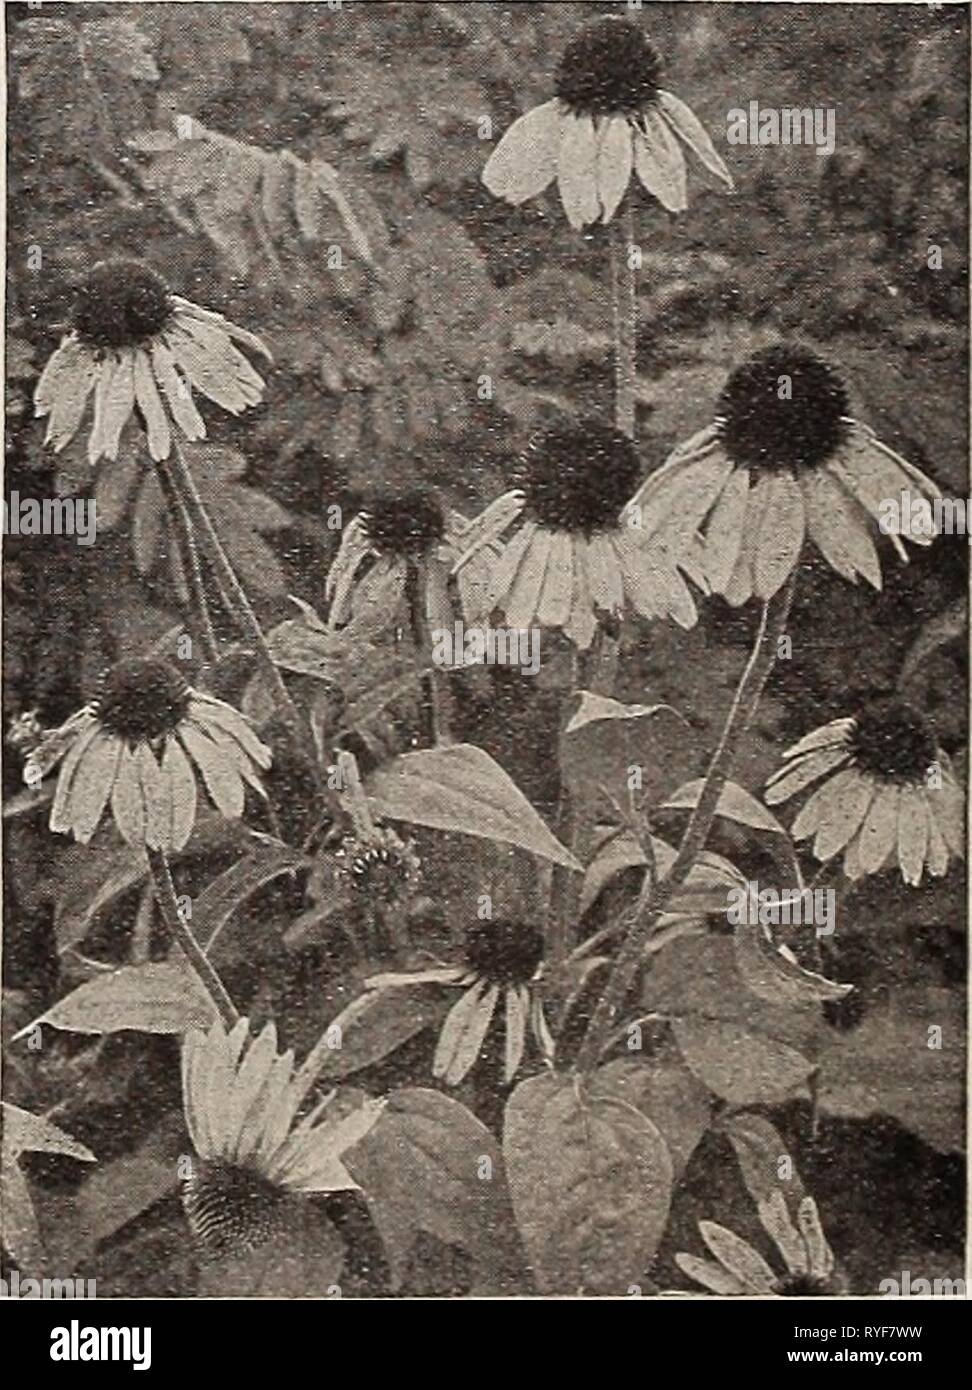 Dreer's wholesale price list for florists : flower seeds plants and bulbs vegetable and lawn grass seeds sundries  dreerswholesalep1934henr 0 Year: 1934  Rosemary (Rosmarinus) Pyrethrum Hybridum Perennial Primulas (Hardy primrose) Tr. pkt. Oz. Auricula. Choice mixed.  oz., $1.25 SO 50 Polyanthus Invincible Giant. A grand strain of strong vigorous habit, large flowers of wonderful coloring 50 $6 00 ' Giant Munstead Strain. Ex- tra large flowers in white and yellow 50 5 00 ' English Mixed. A very good grade saved from a fine strain containing all colors 40 2 50 Japonica (Japanese Primrose). Brig Stock Photo